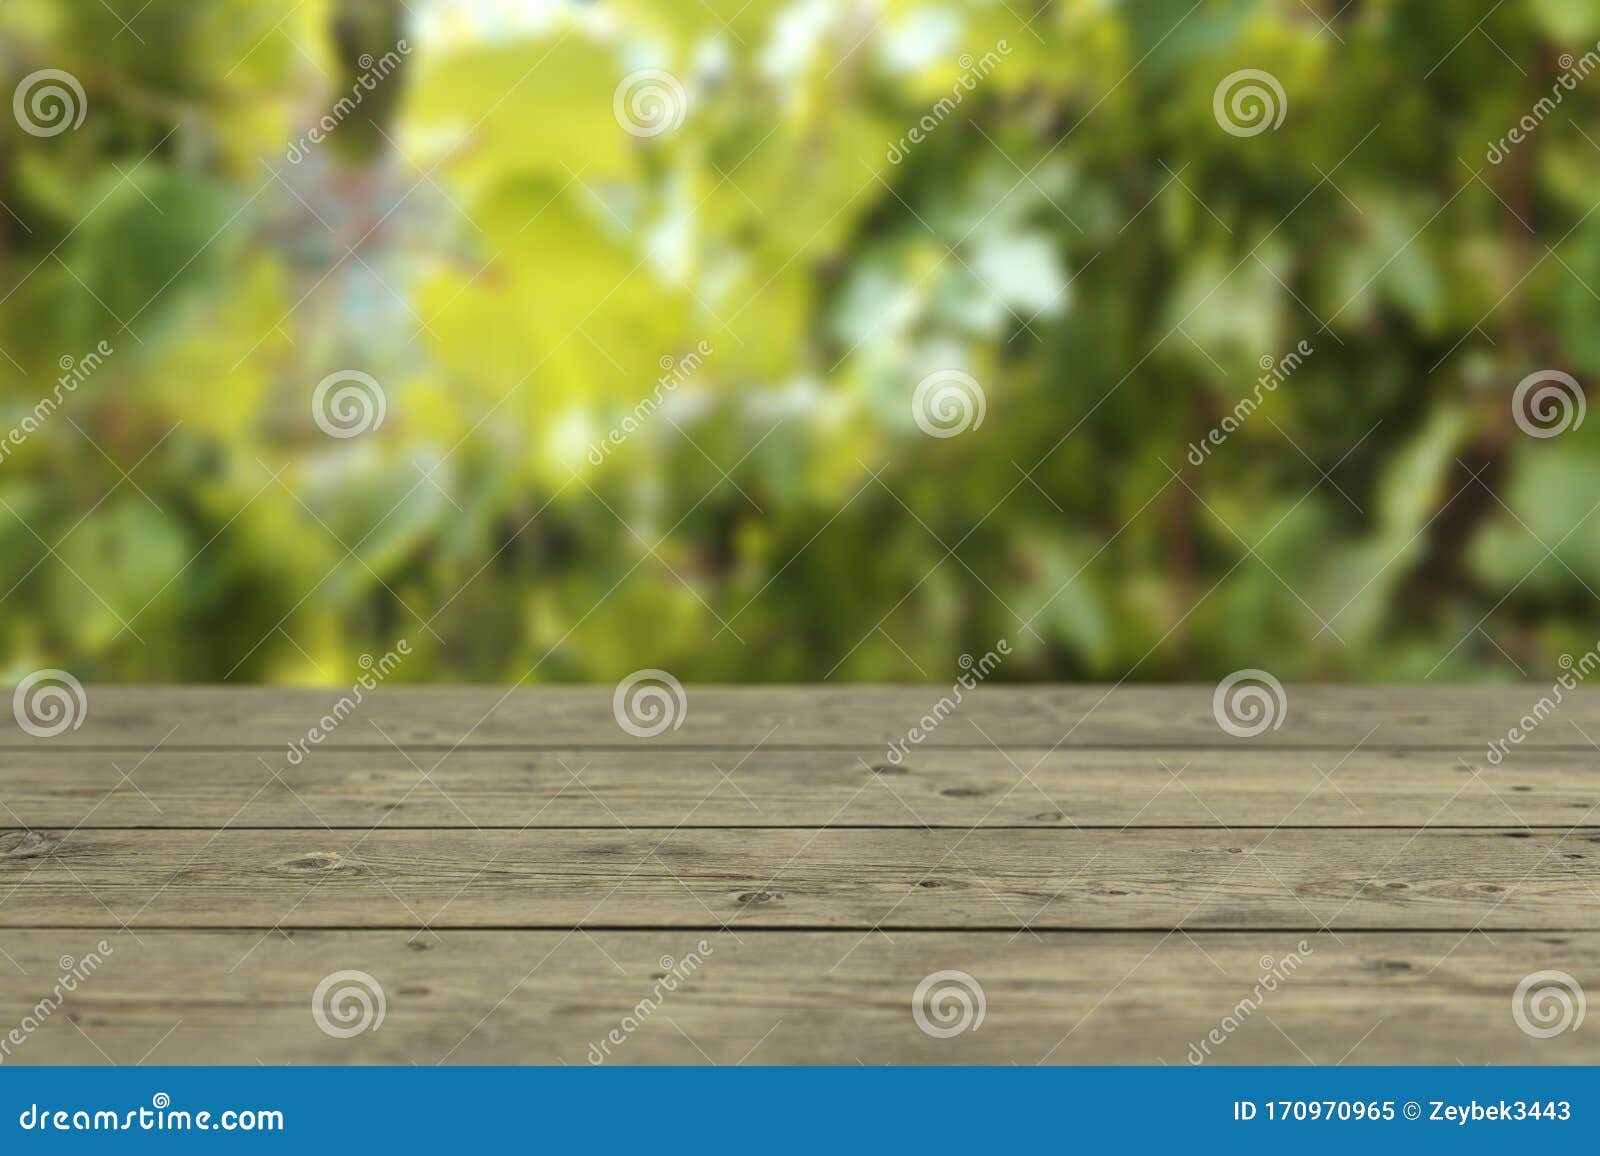 Empty White Wooden Table with Nature Green Blurred Background,Free Space  for Product Editing Stock Illustration - Illustration of bokeh, empty:  170970965